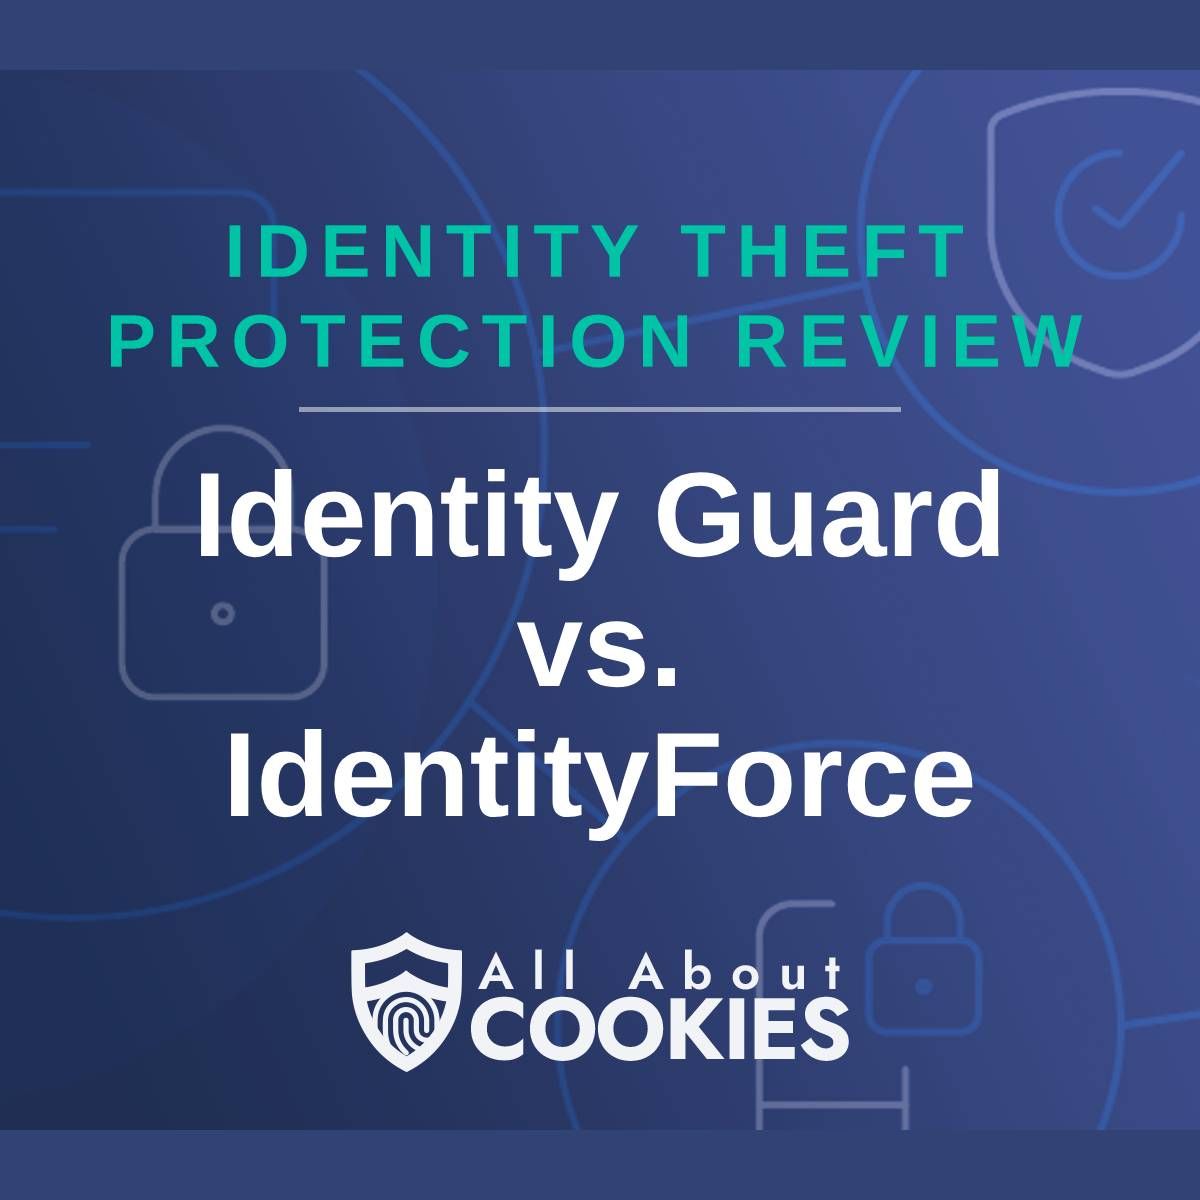 A blue background with images of locks and shields with the text "Identity Theft Protection Review Identity Guard vs. IdentityForce" and the All About Cookies logo. 